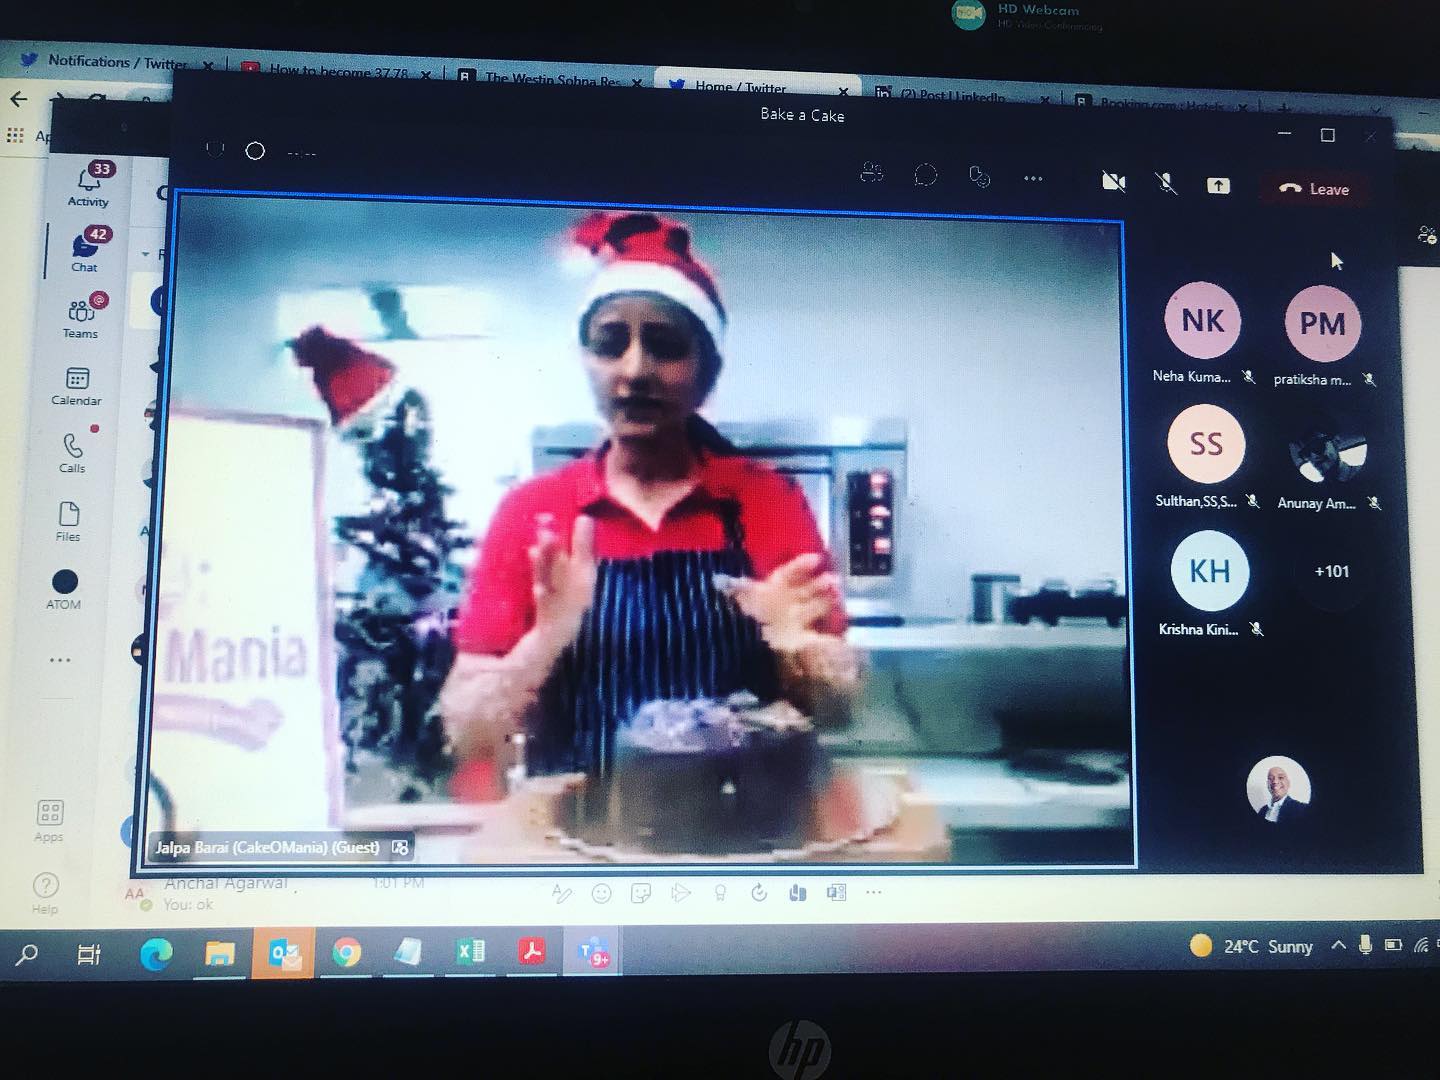 Our founder Jalpa Barai live on @techmahindra_official Internal Event 

The workshop covered baking basics, temperature settings, alternative ingredients & more. 

We taught Christmas Fruit & Nut Cake 🎂 

Invite us to your corporate event & make it sweeter (literally 😊)

#corporateevents #virtualevent #virtualworkshop #bakingclass